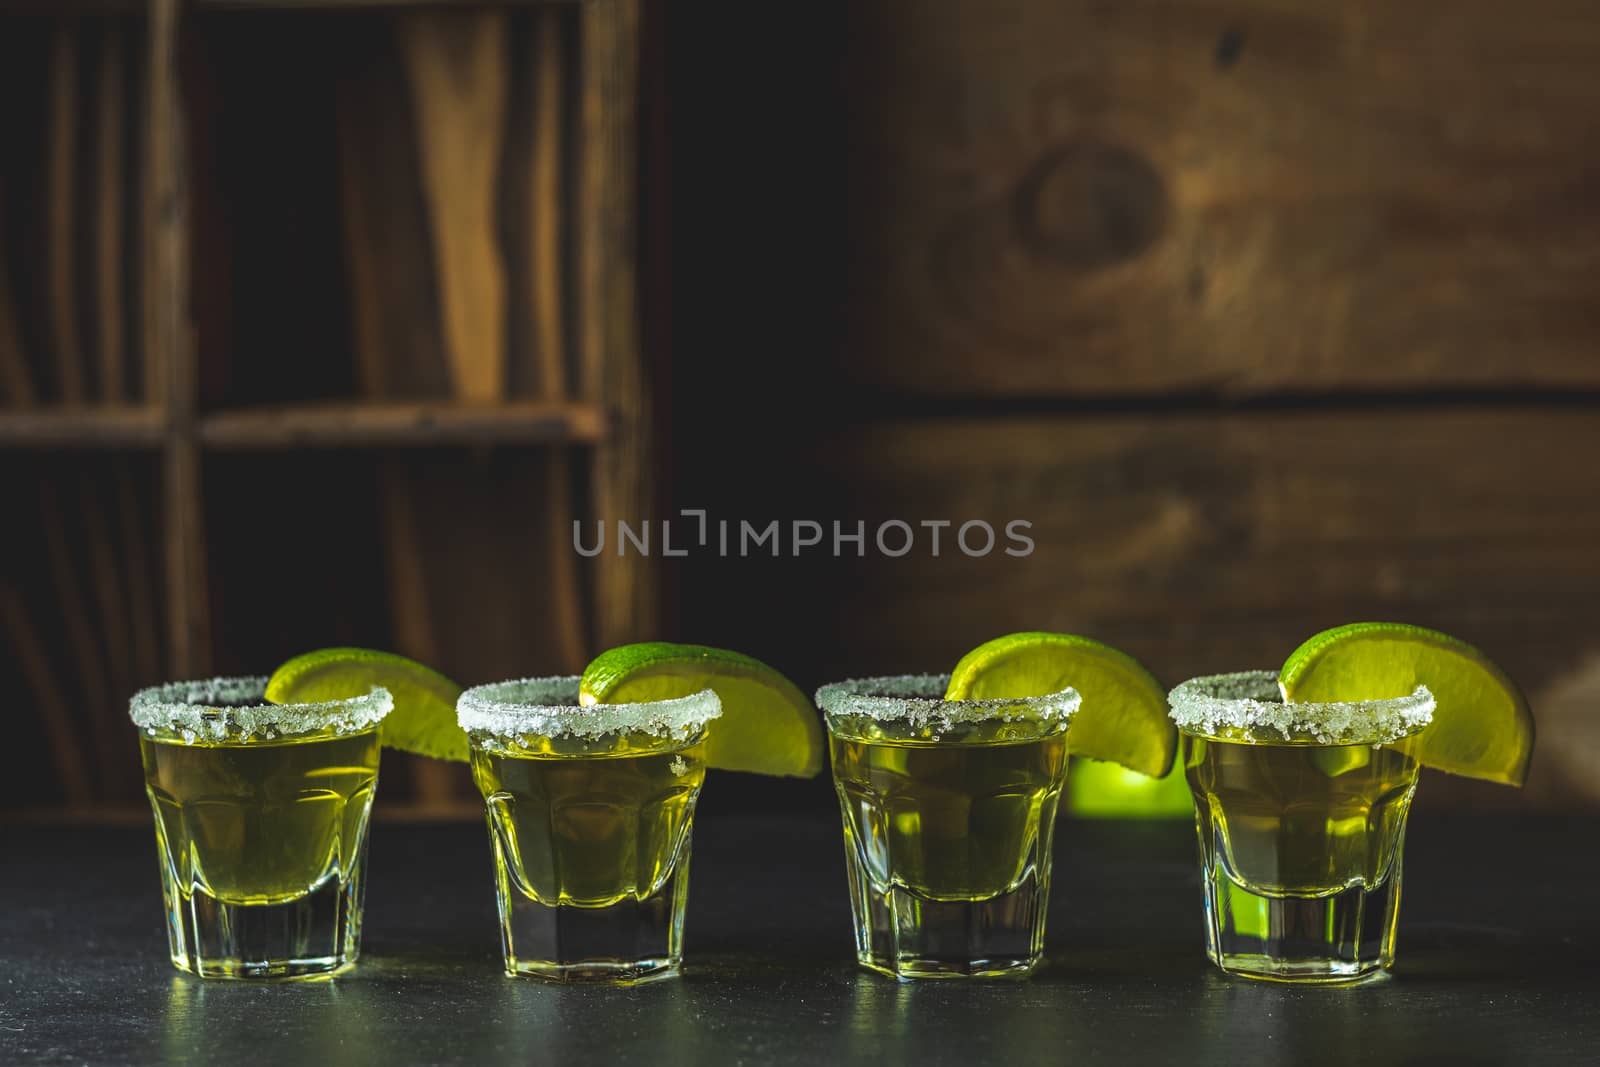 Mexican Gold Tequila shot with lime and salt on black stone table surface, selective focus, shallow depth of the field, copy space.